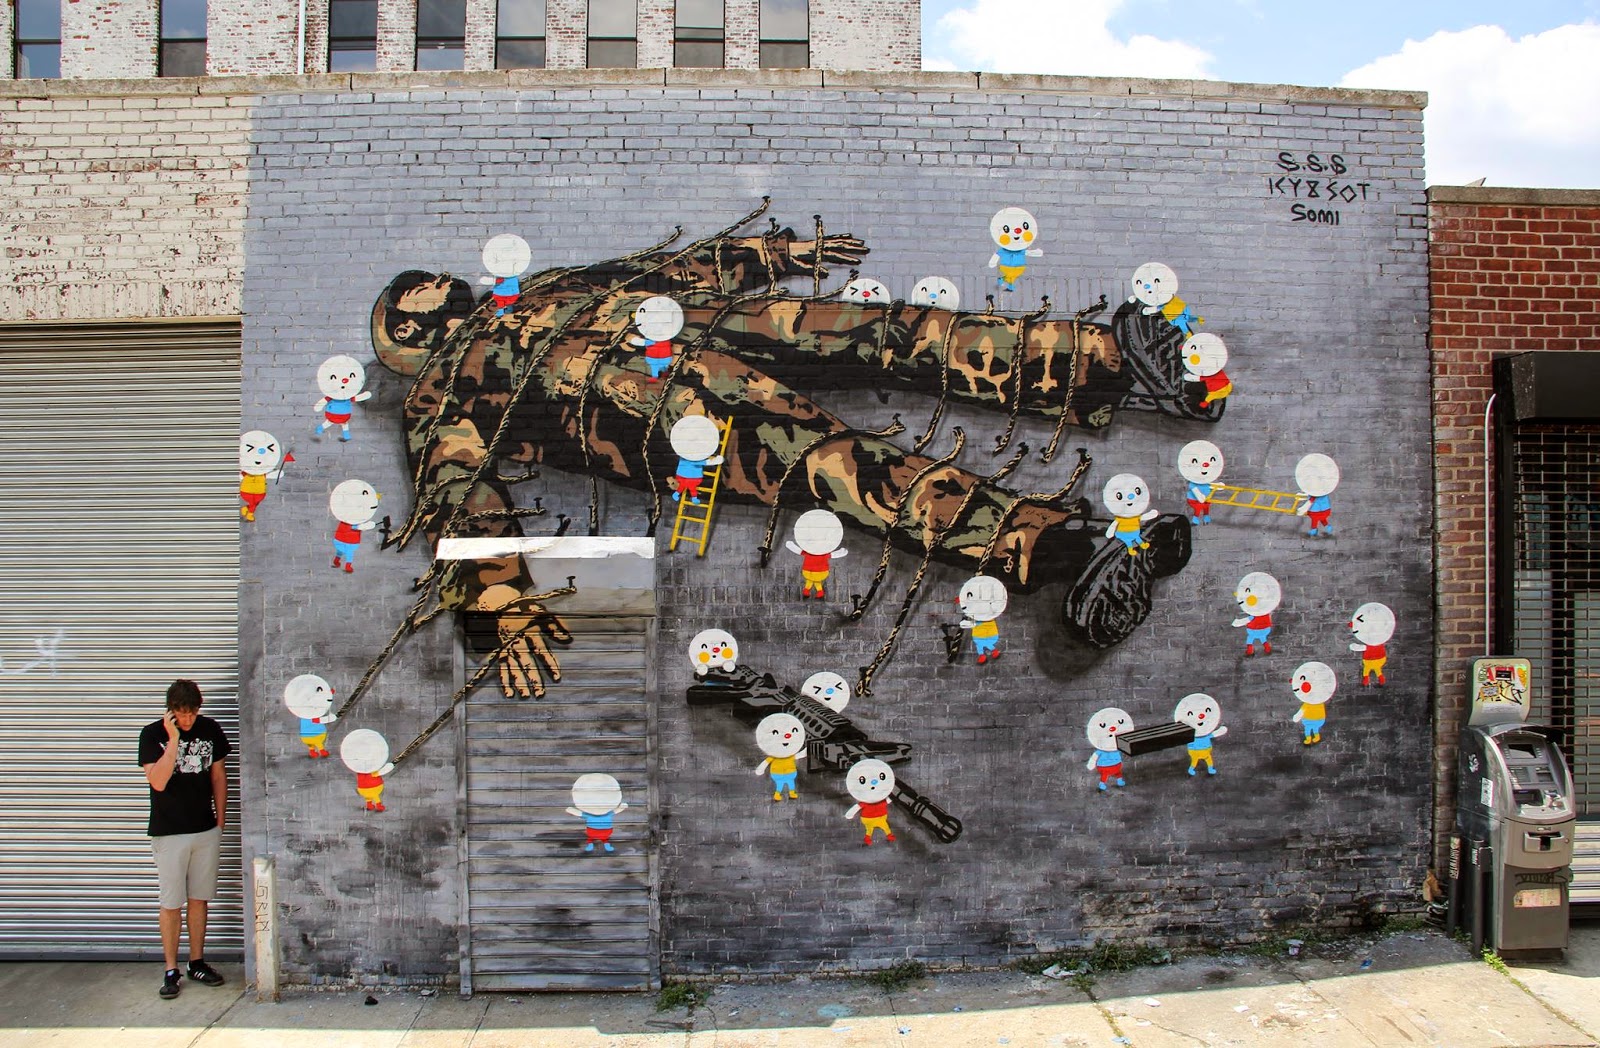 Icy and Sot recently teamed up with Sonni to work on this new collaboration on the streets of New York City.